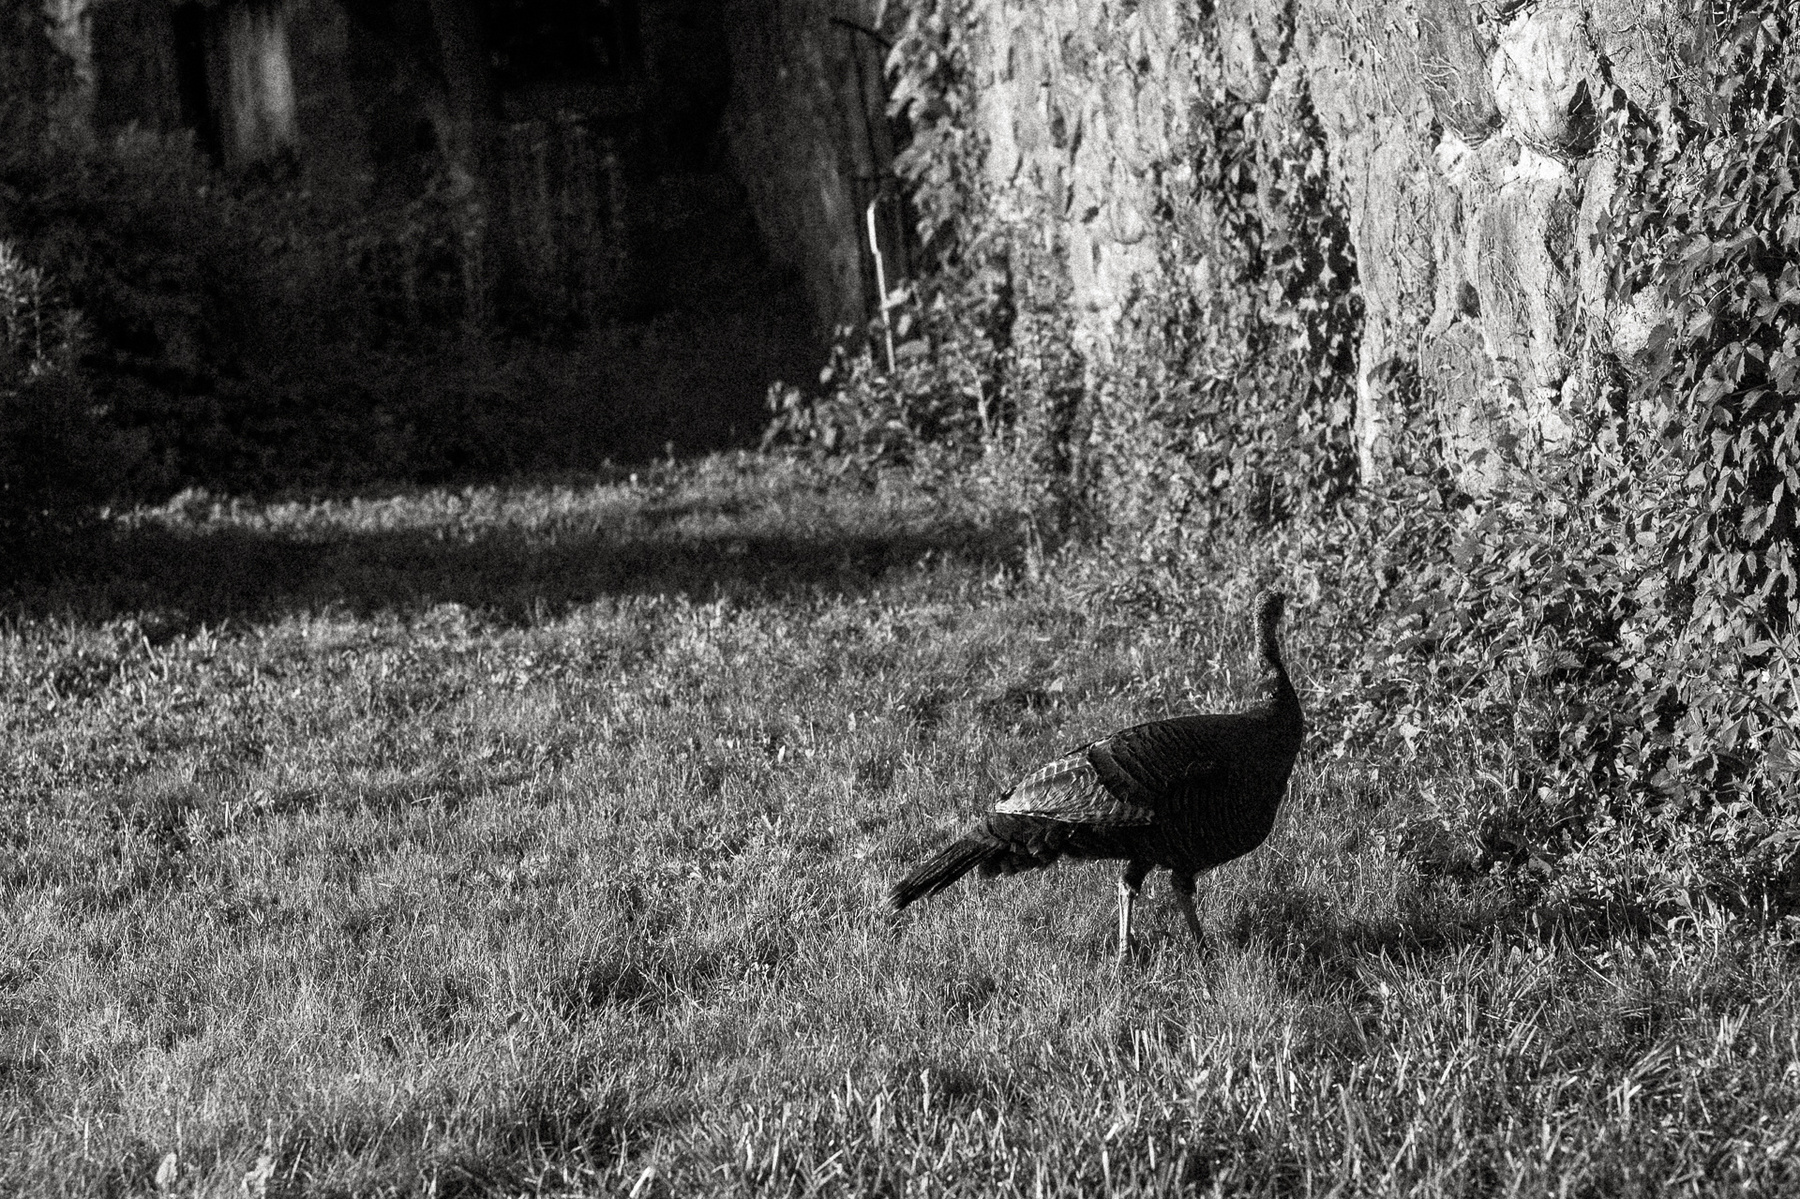 A turkey on the grounds of the Crane Estate